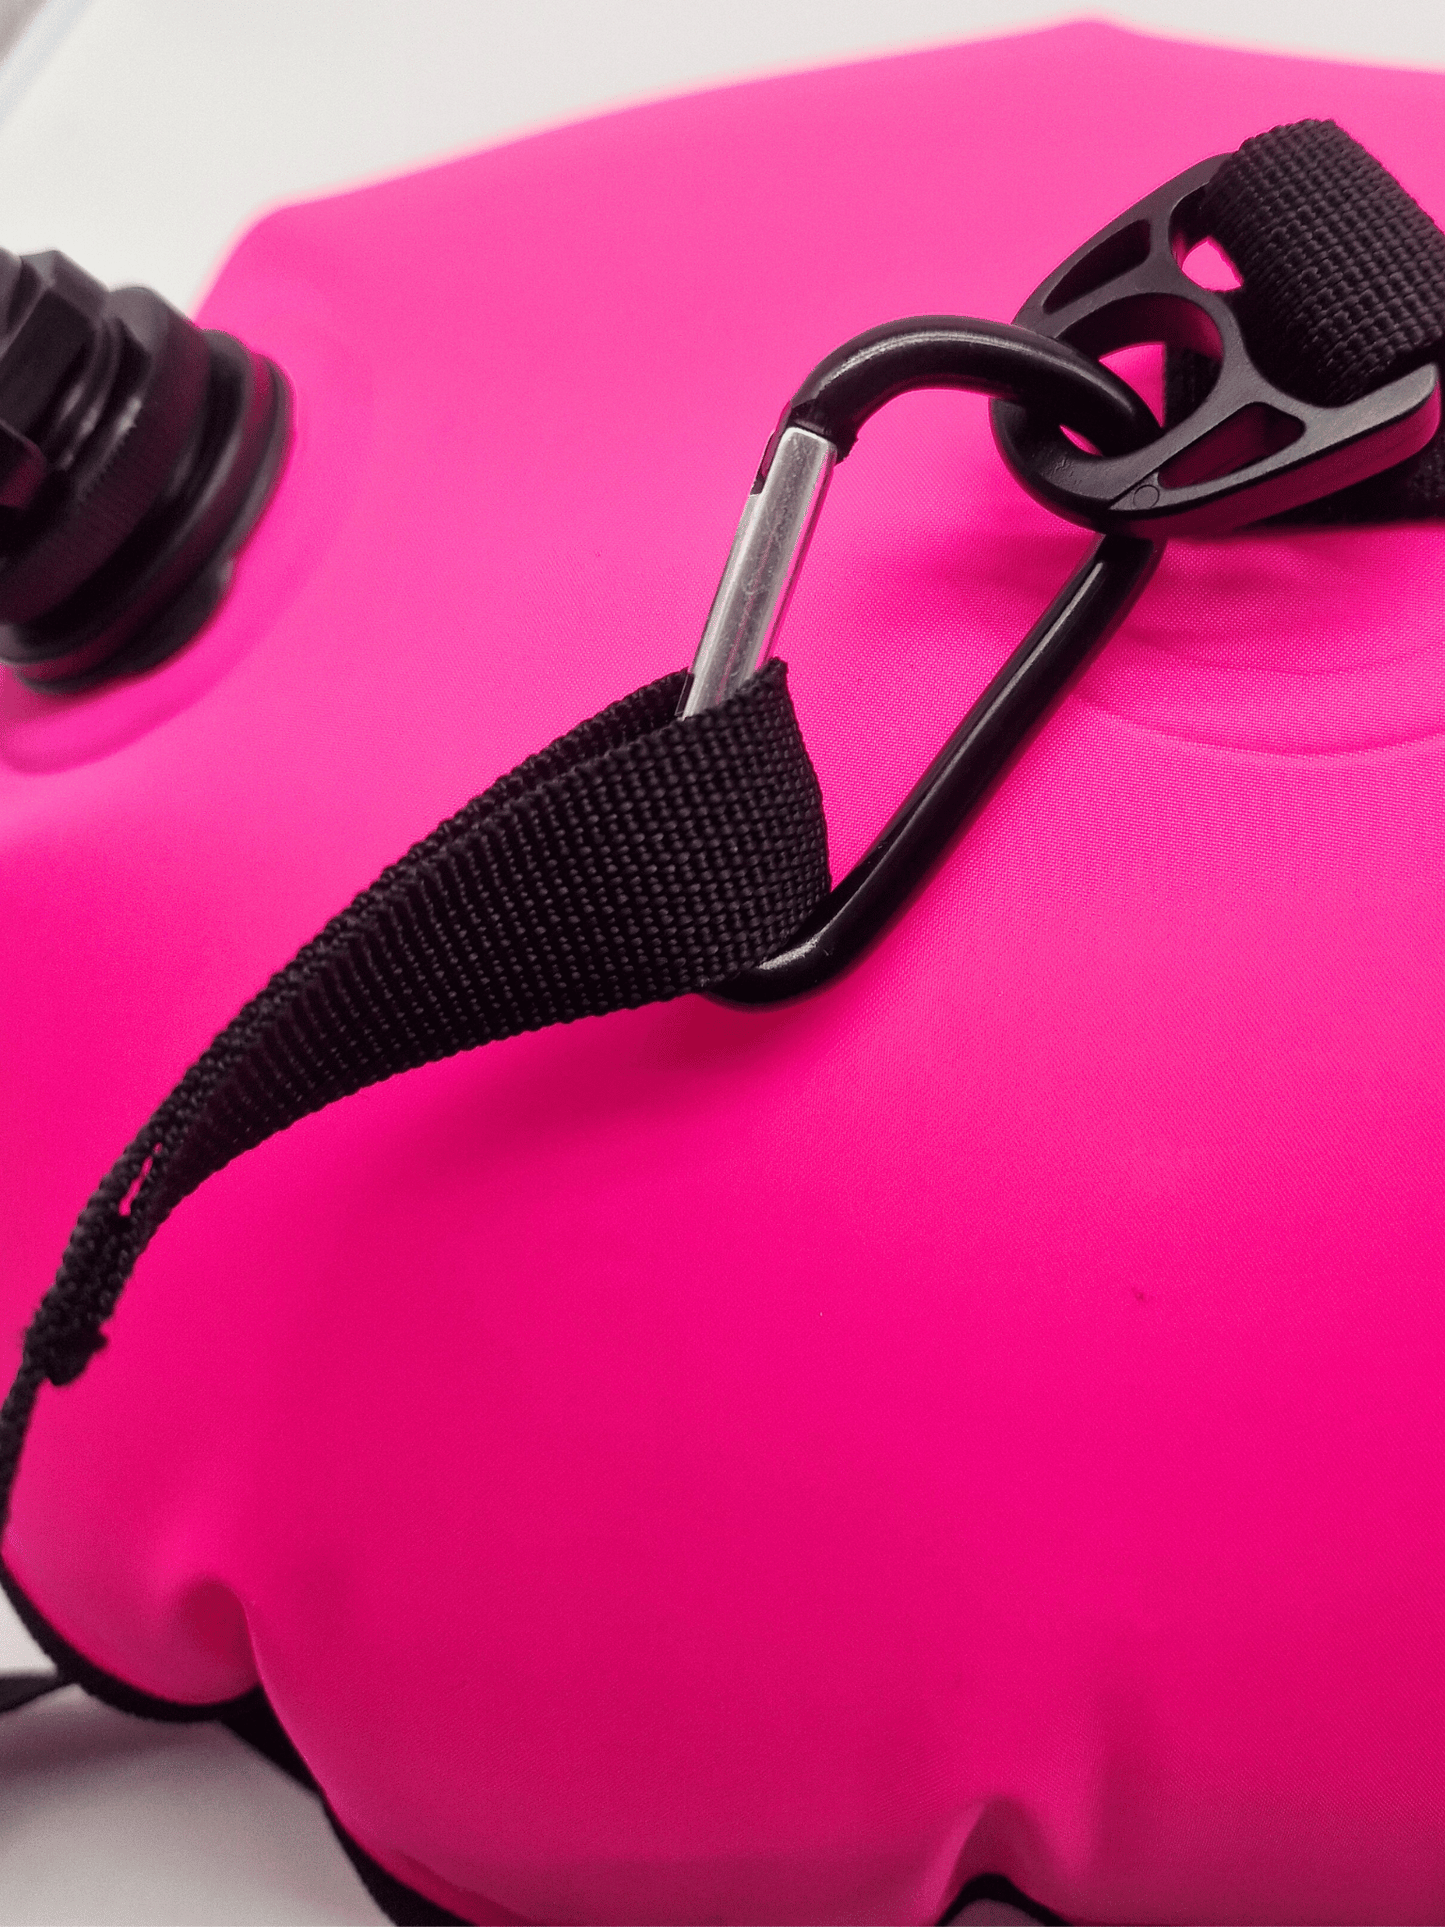 caribiner clip of leash on pink tow float